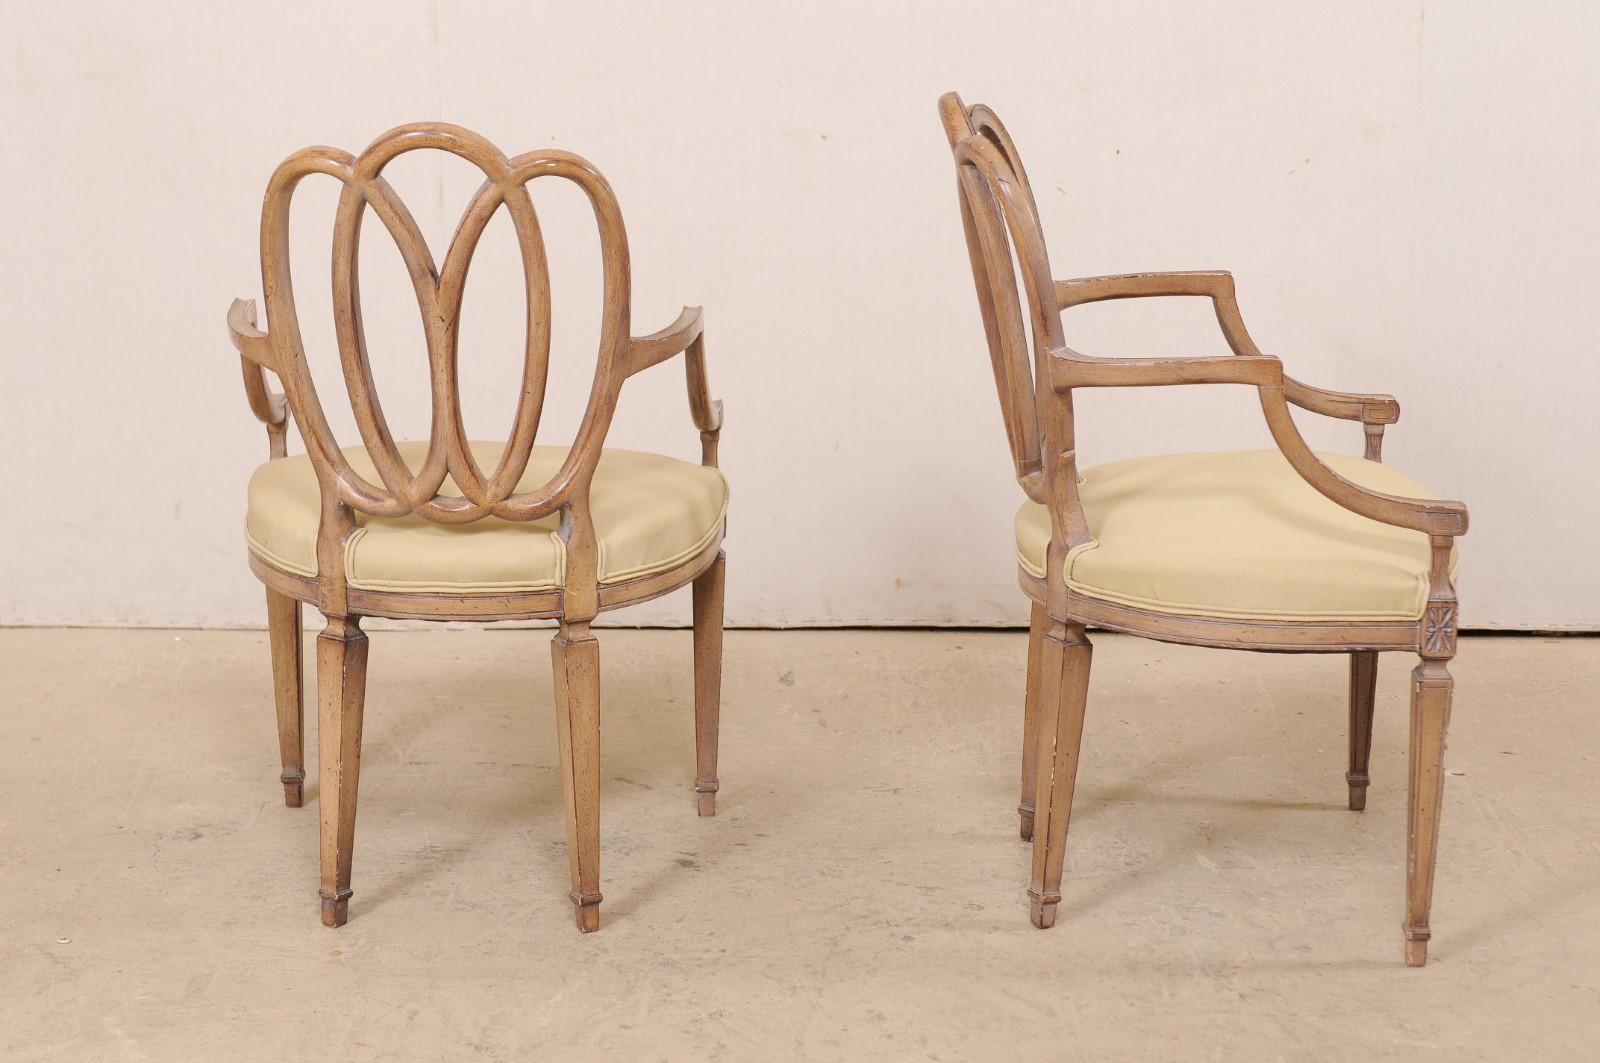 Italian Pair of Carved-Wood Armchairs with Upholstered Seats, Mid-20th Century For Sale 3